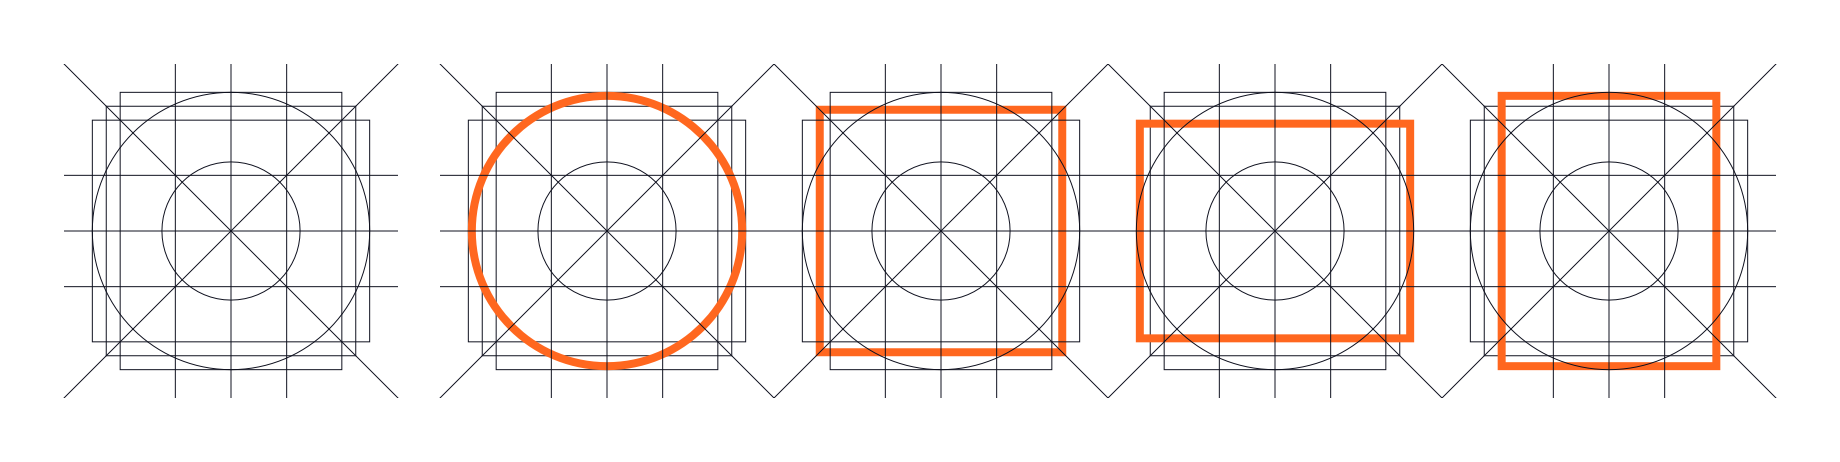 image of grids and icon forms